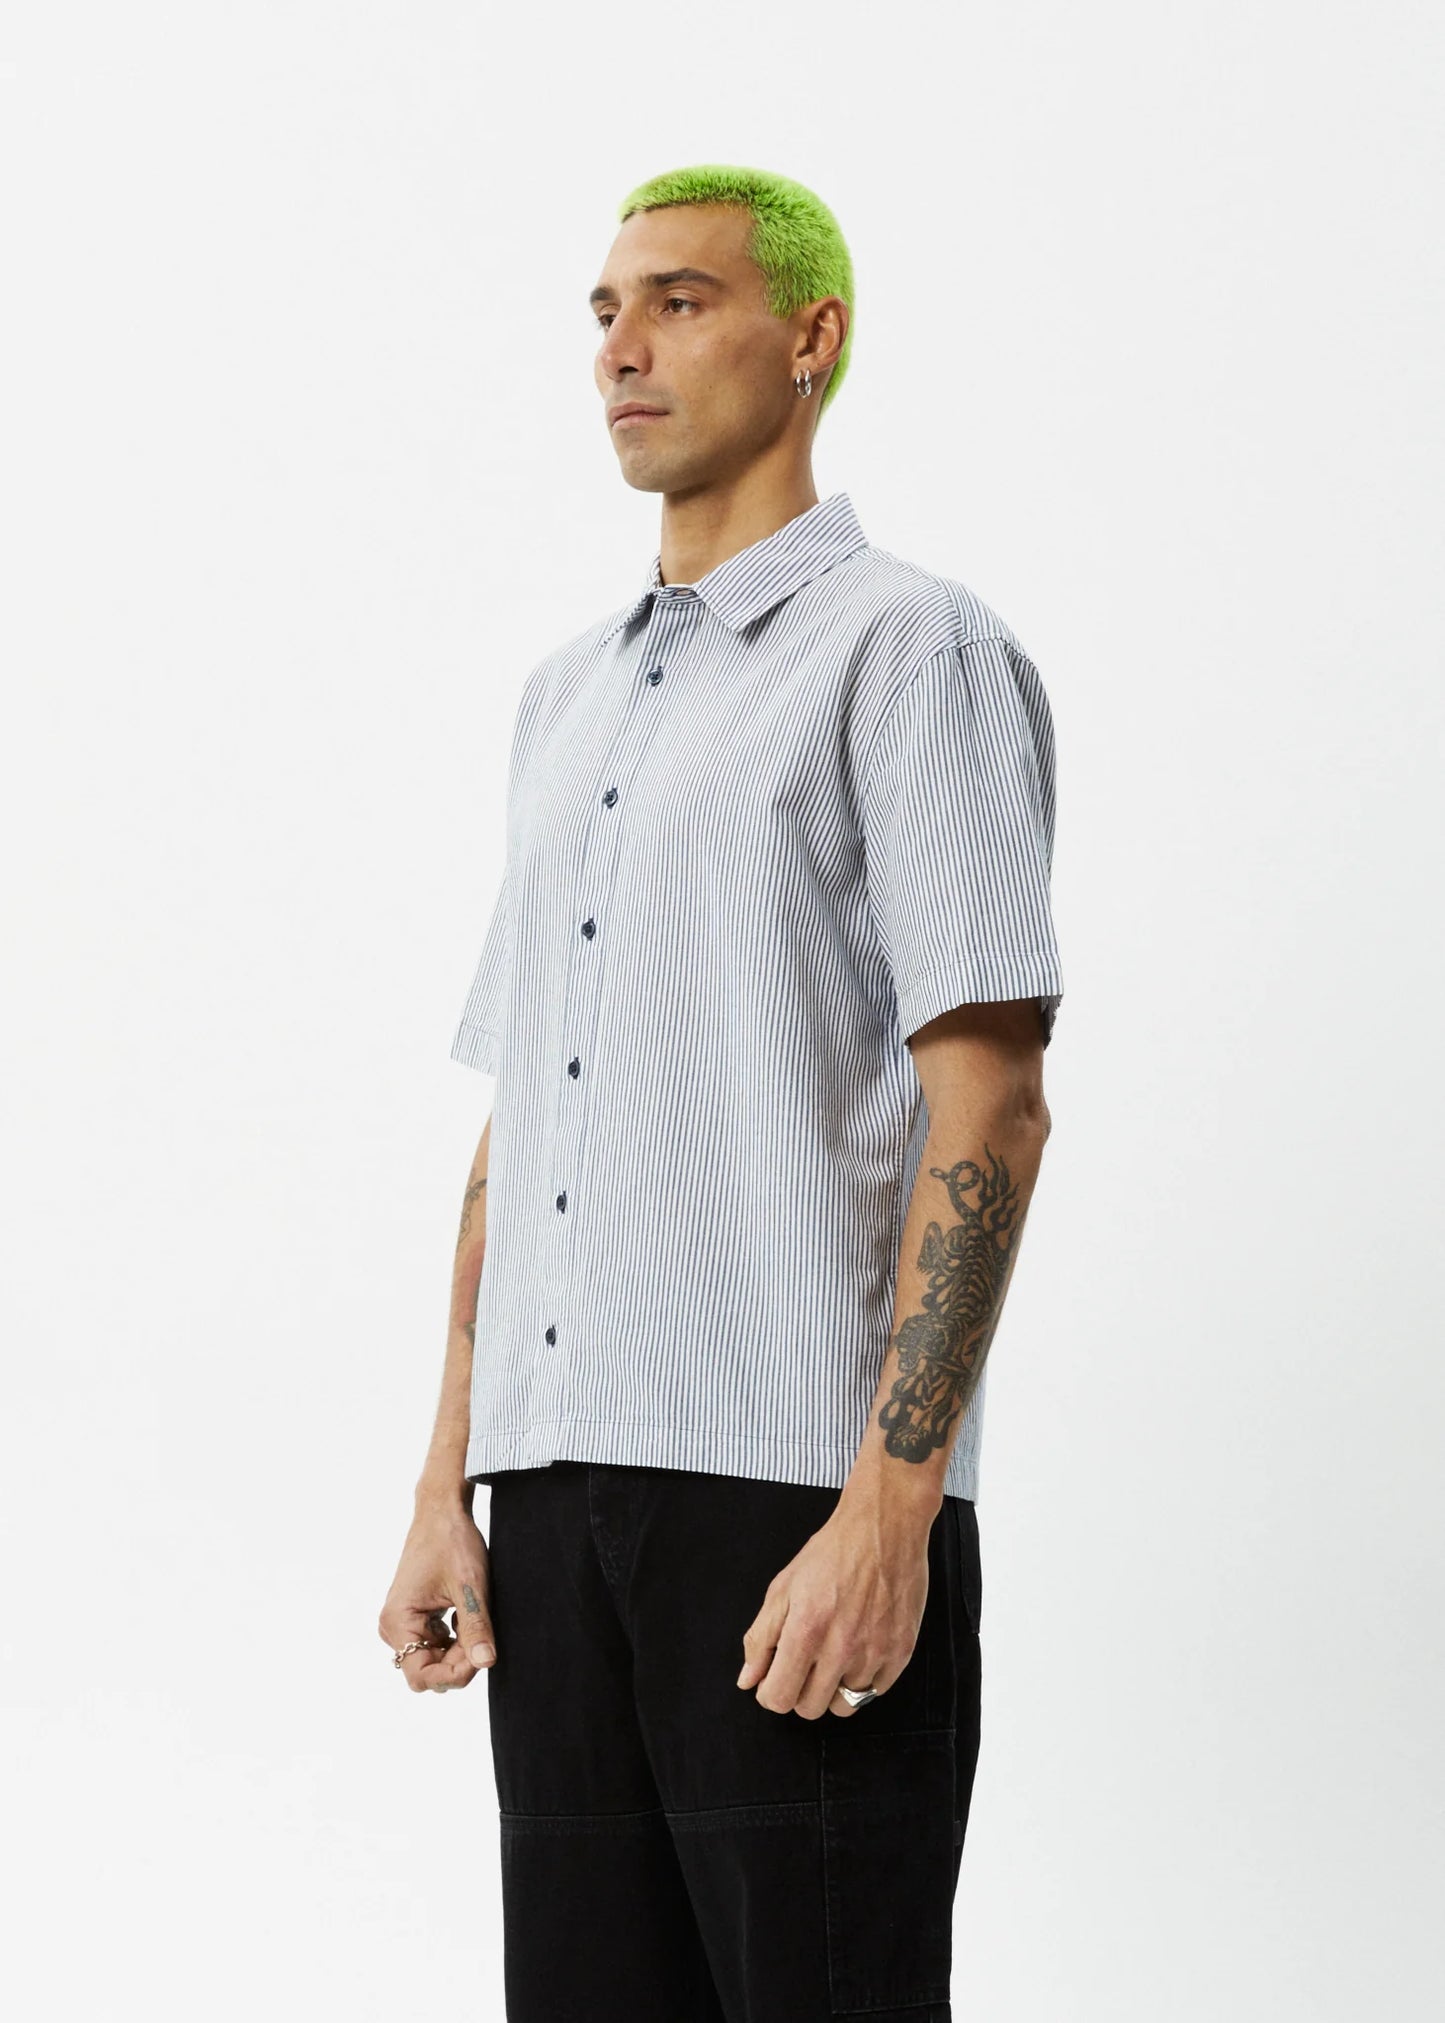 m tops - AFENDS - Intergalactic Recycled Short Sleeve Shirt - PLENTY